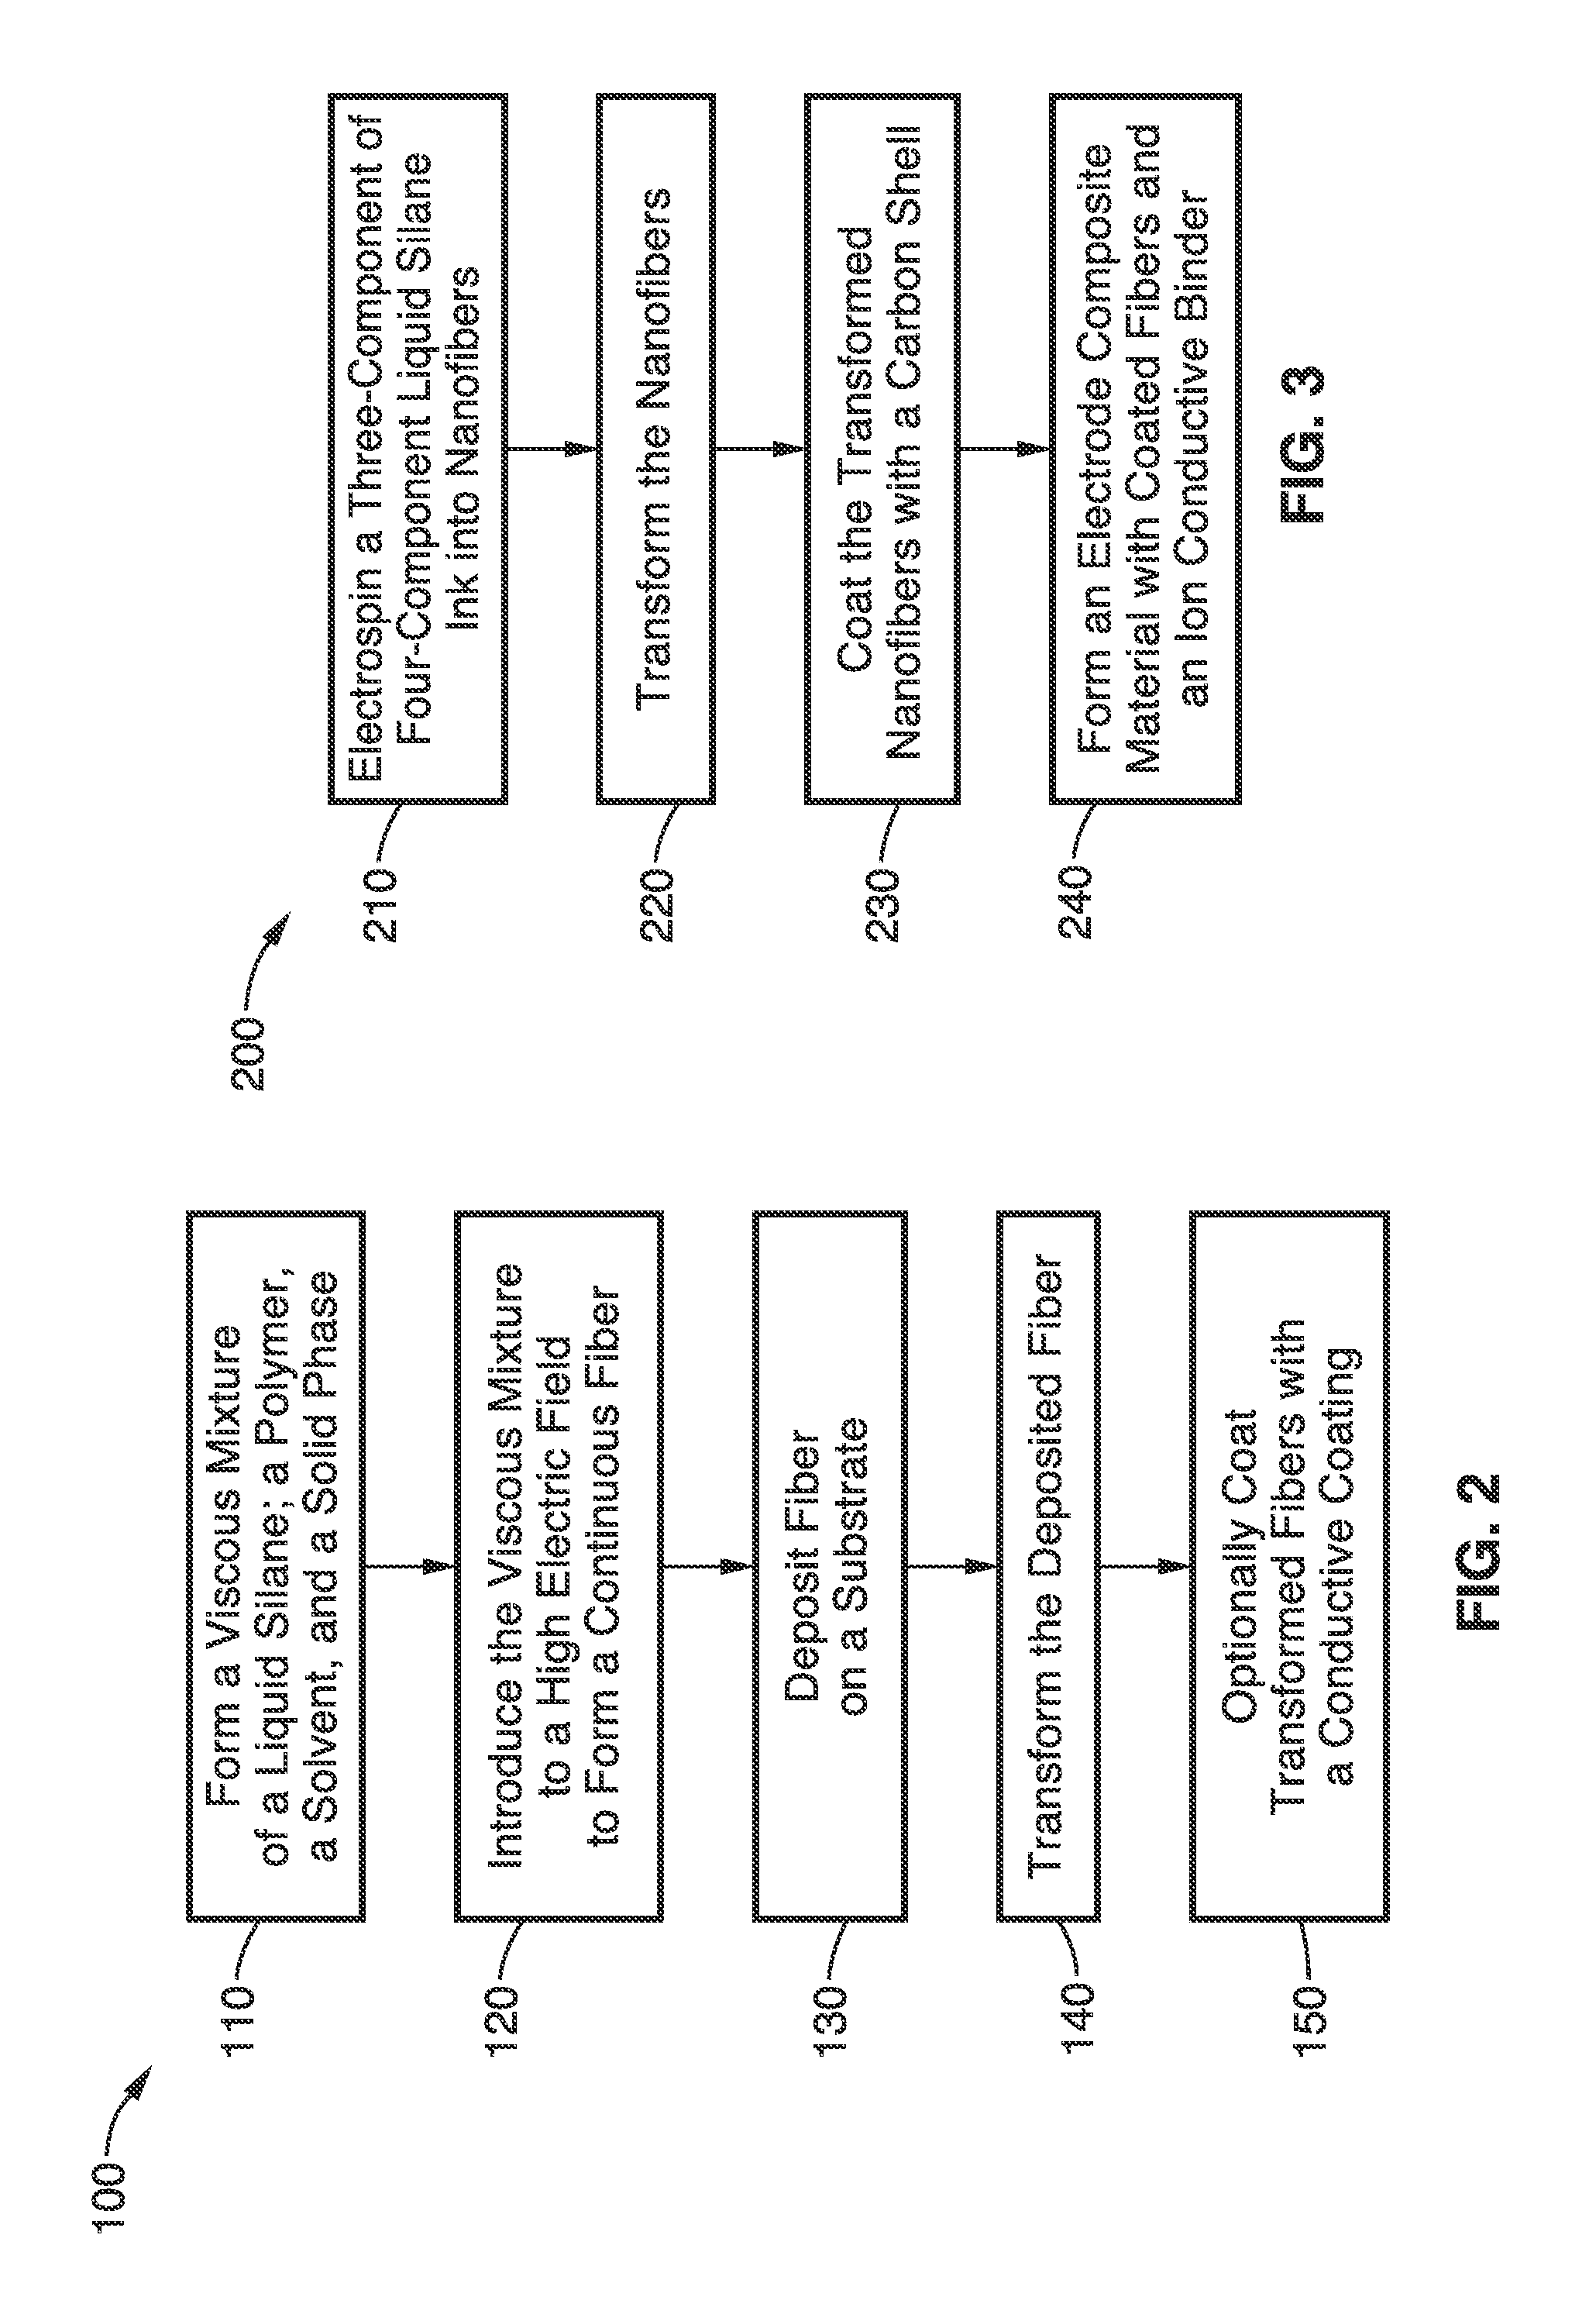 Liquid silane-based compositions and methods for producing silicon-based materials